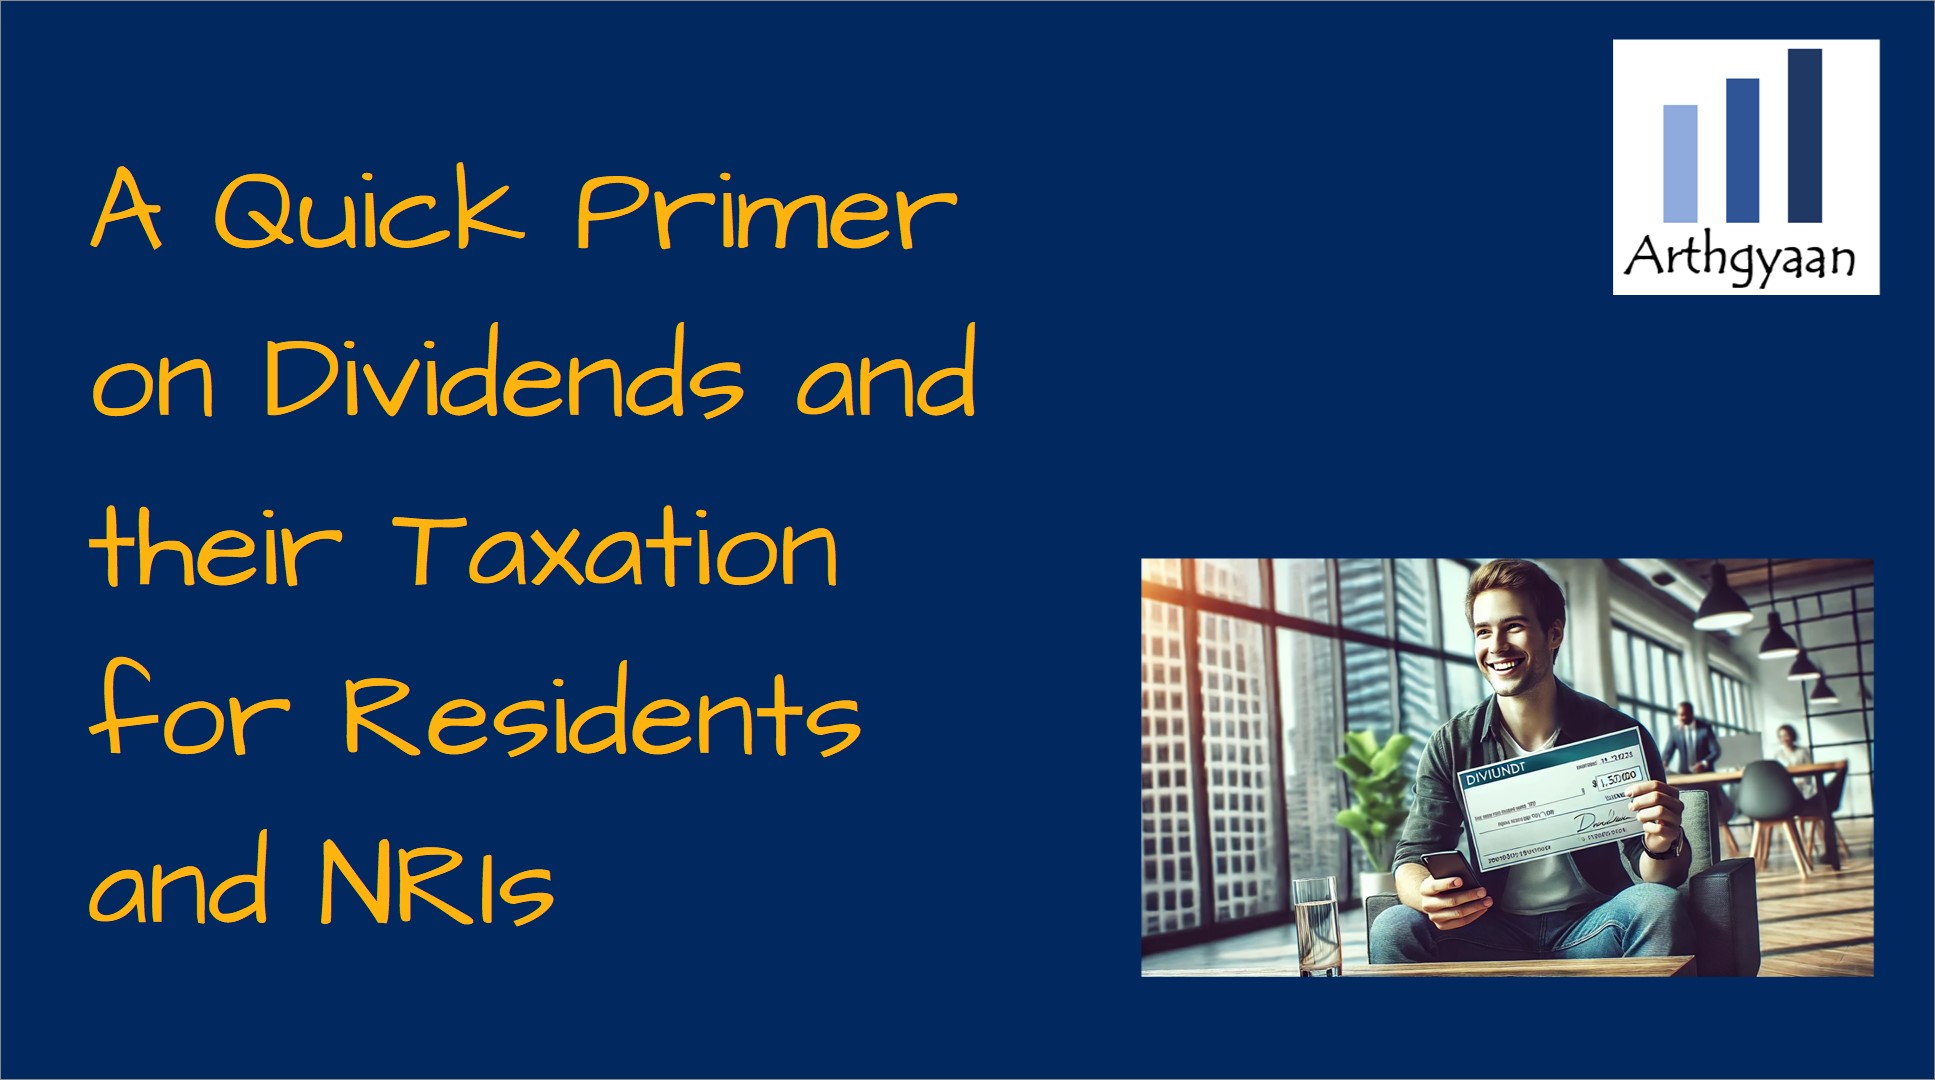 A Quick Primer on Dividends and their Taxation for Residents and NRIs